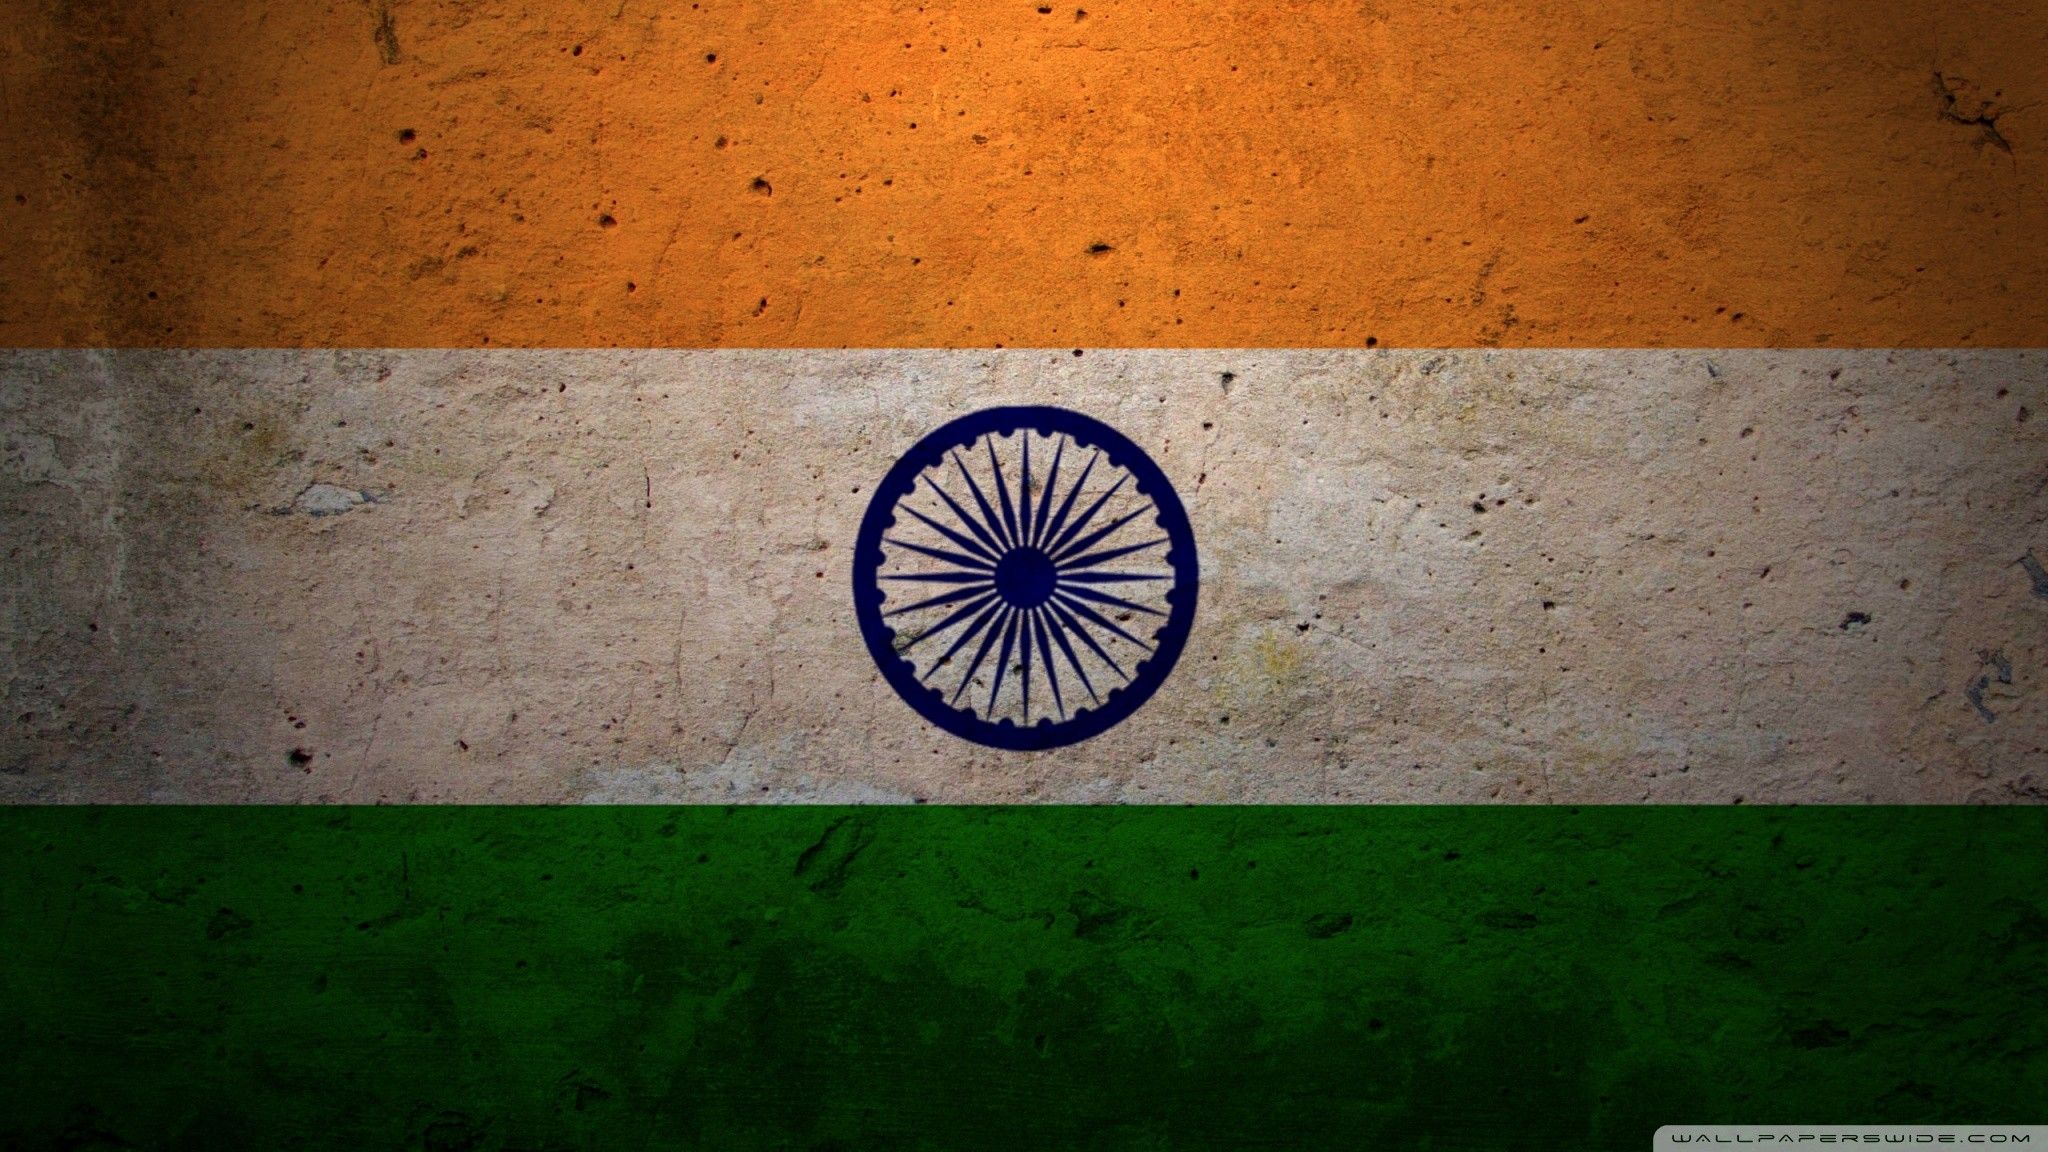 2048 Wide 1152 Tall Wallpaper. Indian flag wallpaper, Indian flag image, Indian flag